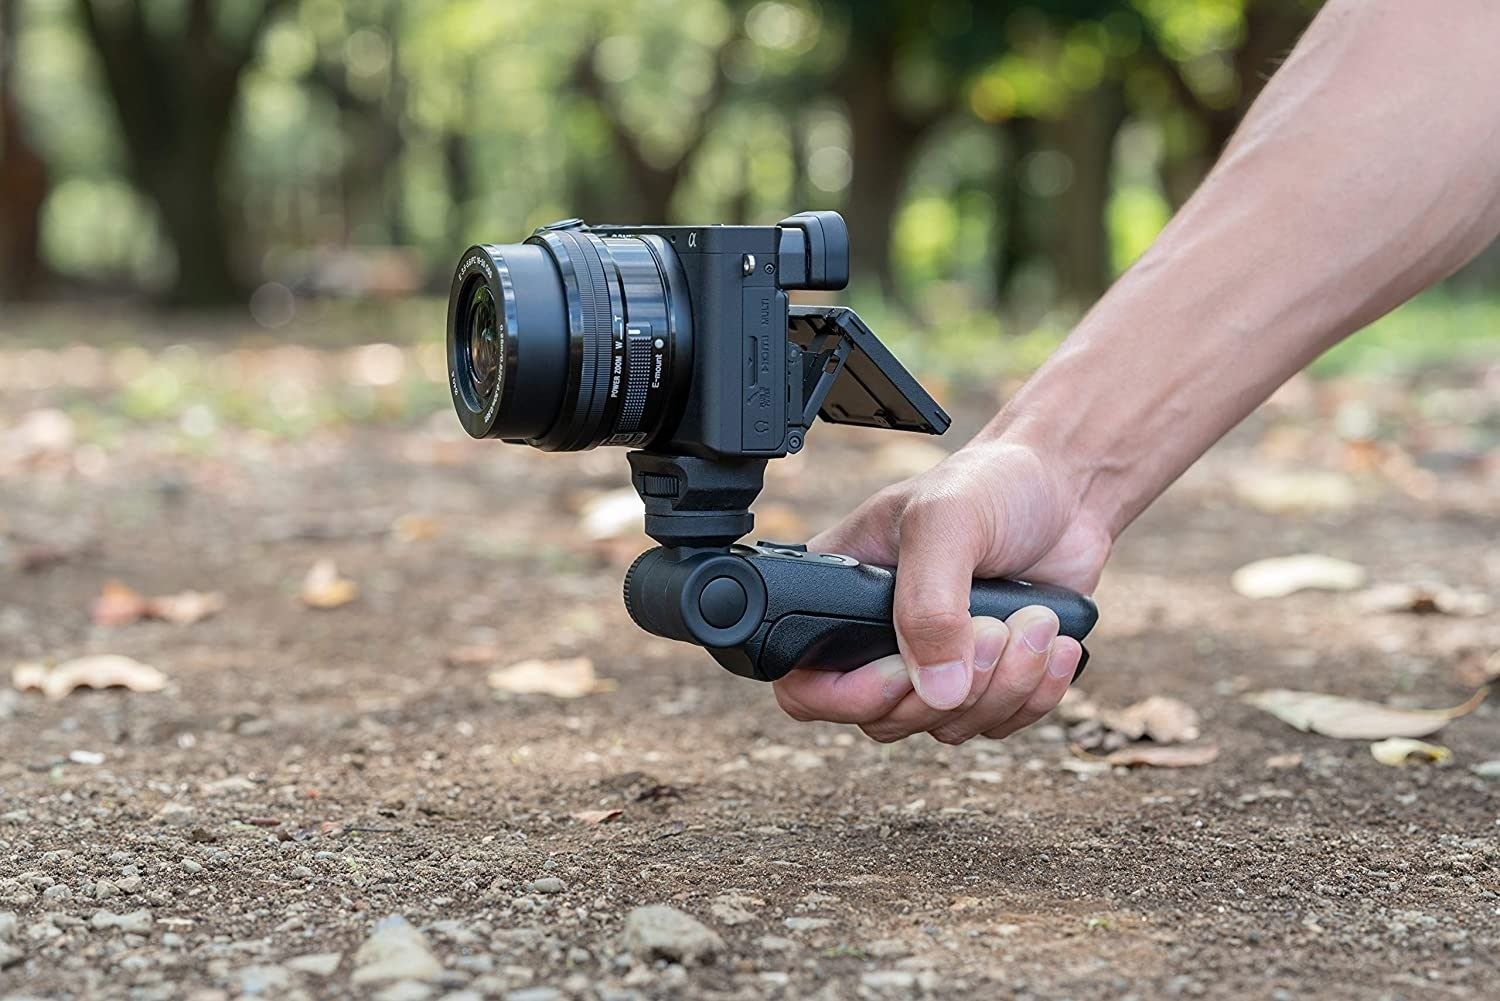 Sony Shooting Grip With Wireless Remote Commander GP-VPT2BT - Product Photo 5 - Another photo of the grip being used in real life with the camera attached and screen extended. Photo is set in the woods whilst being held by the photographer to show the size and scale of the grip